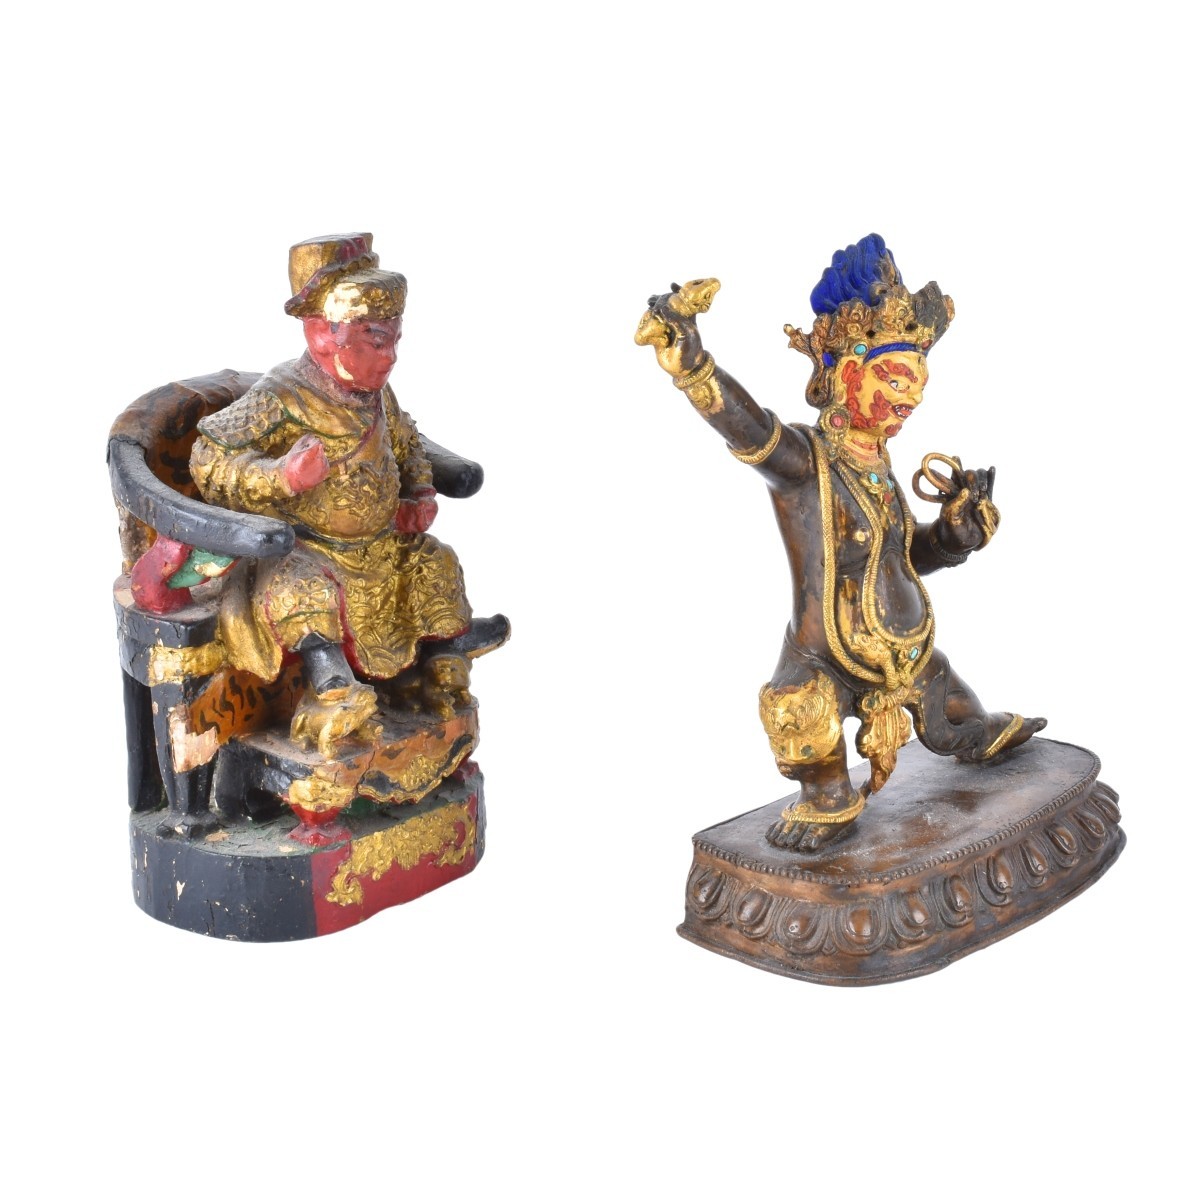 Two (2) Vintage Asian Figurines